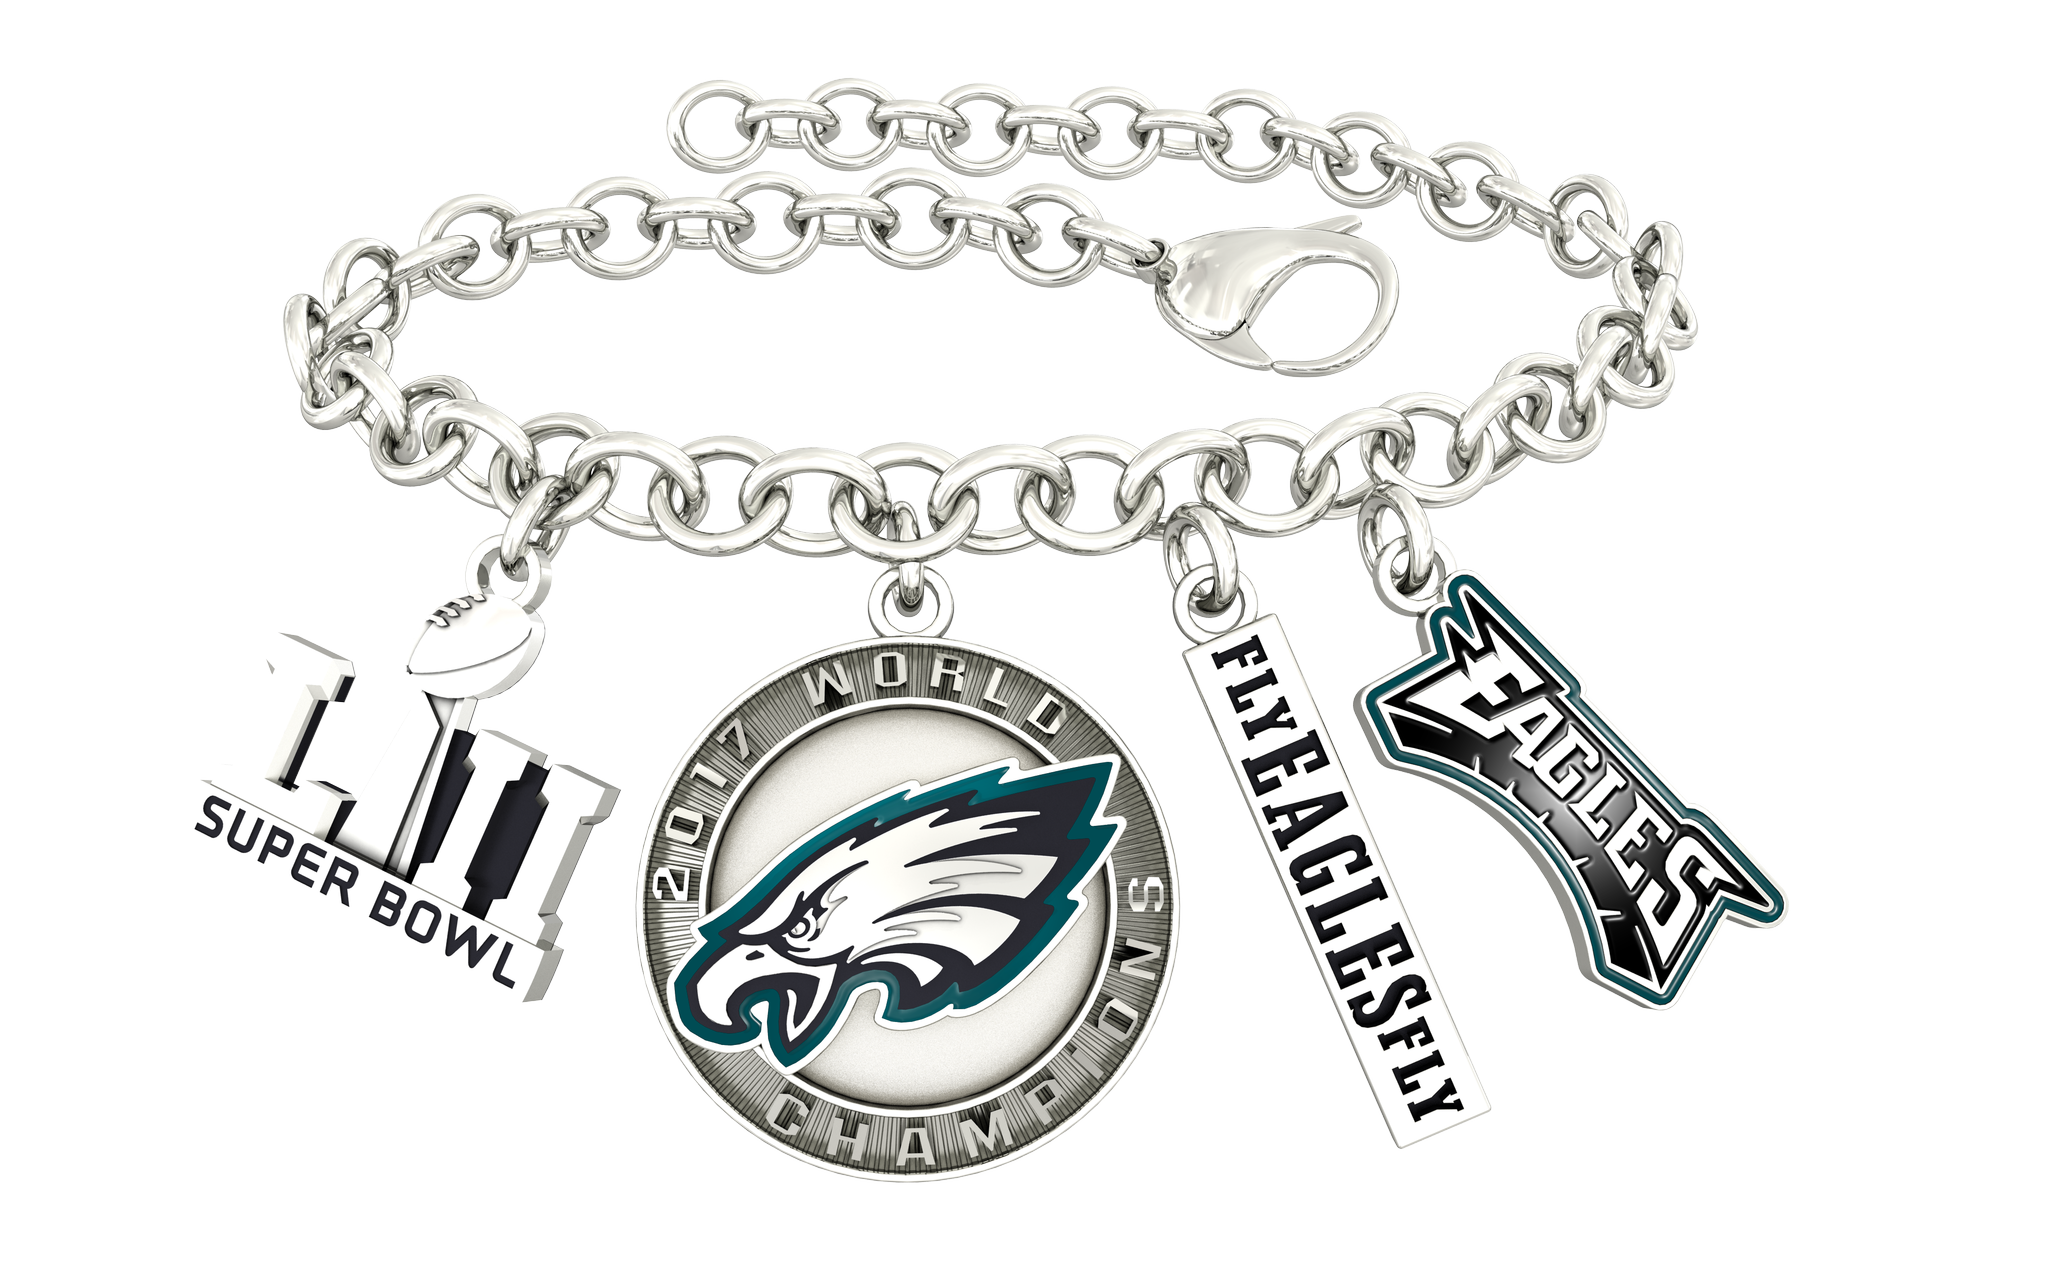 How to purchase an Eagles Super Bowl championship ring